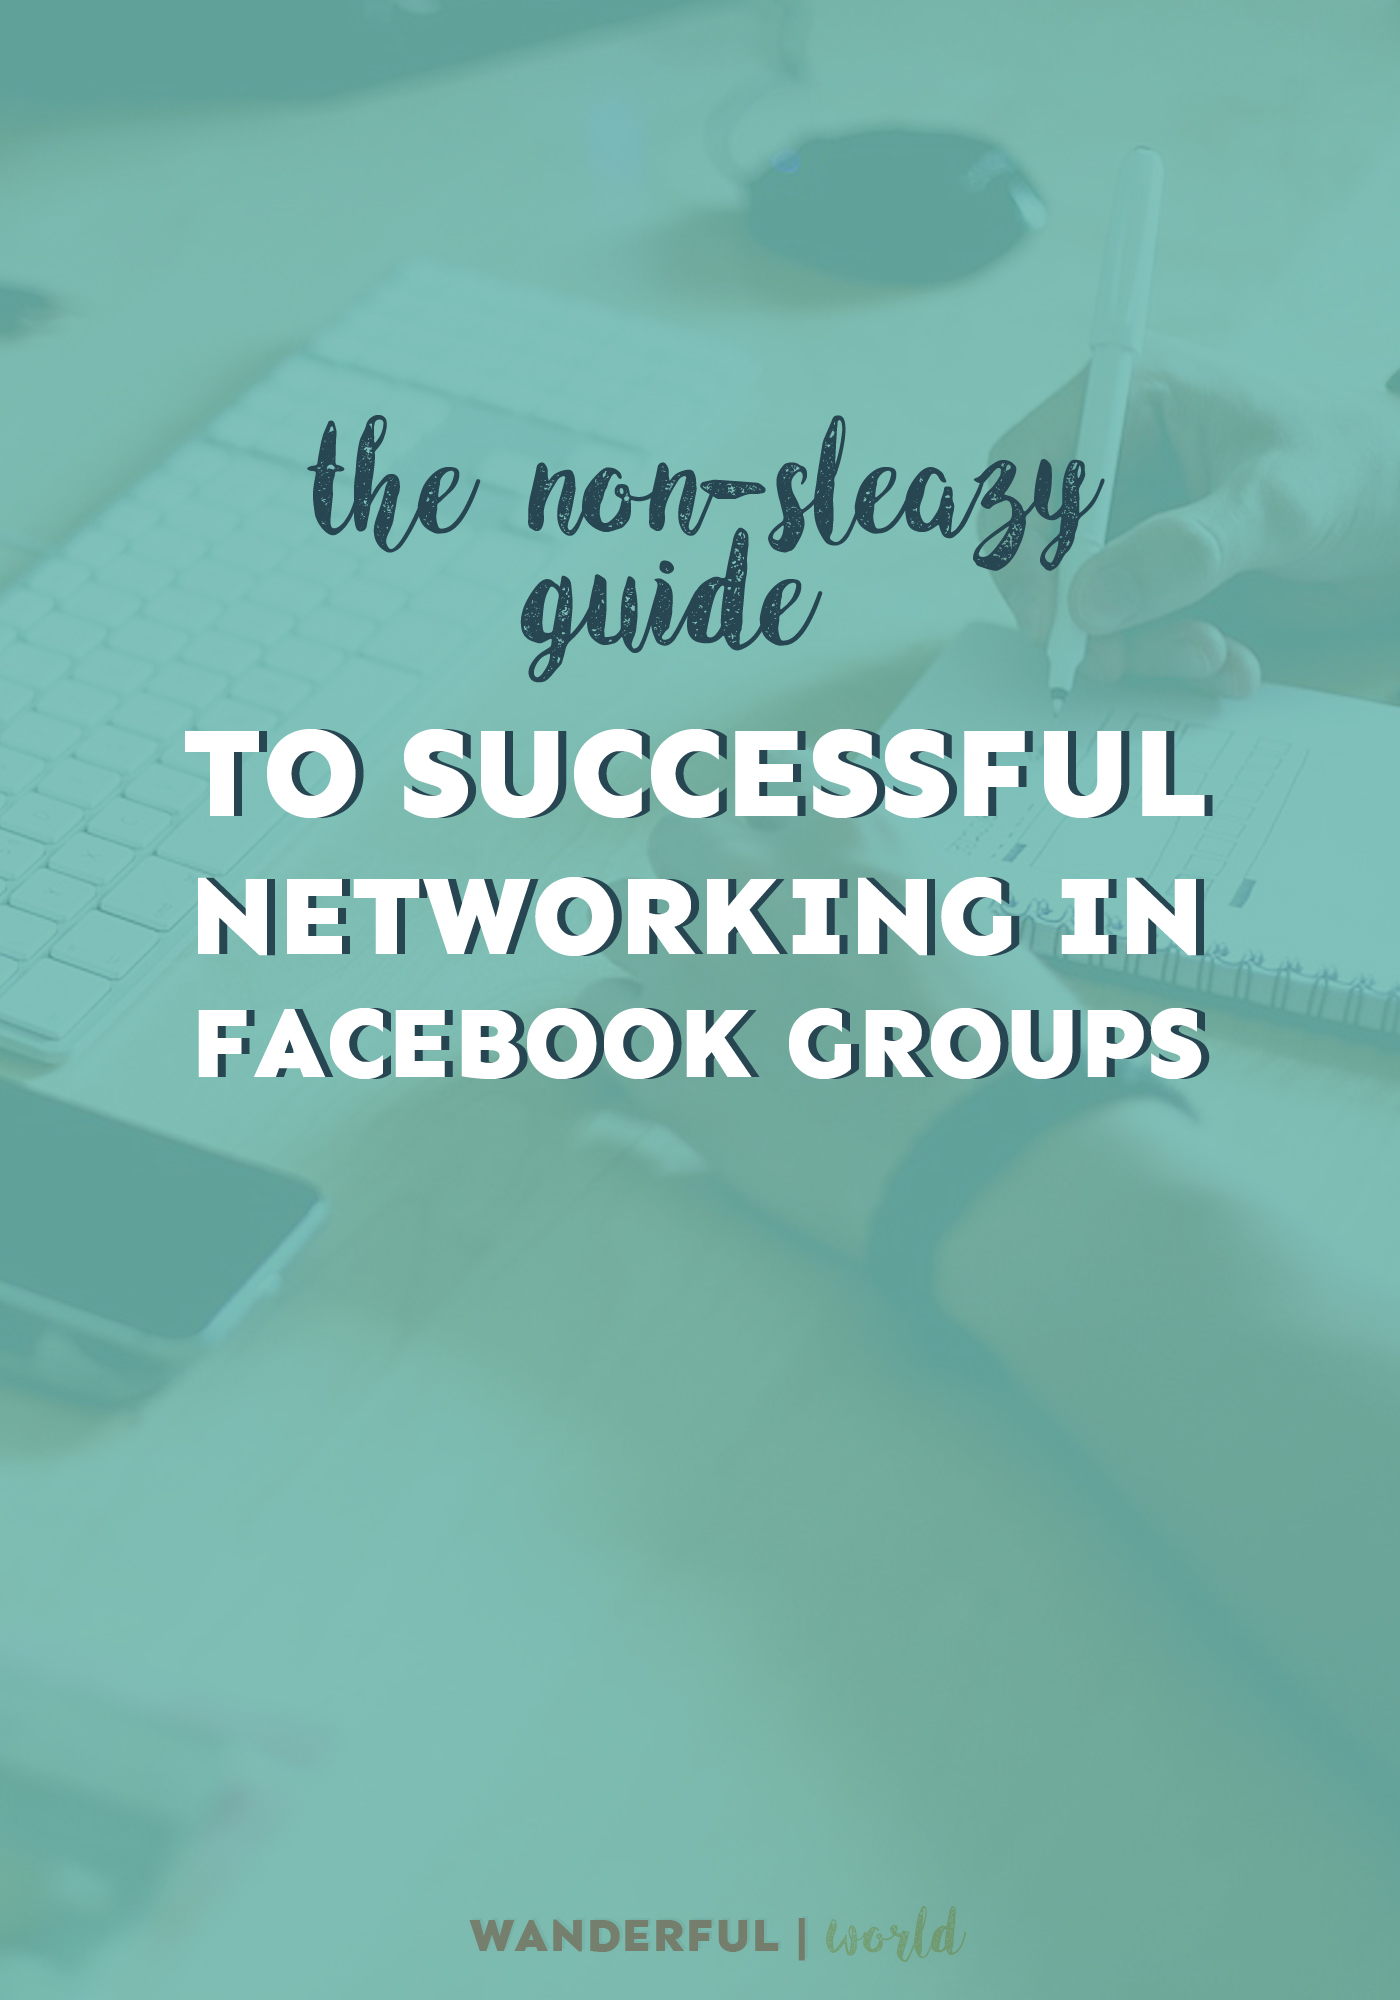 Learn how to successfully network in Facebook groups and land more clients!